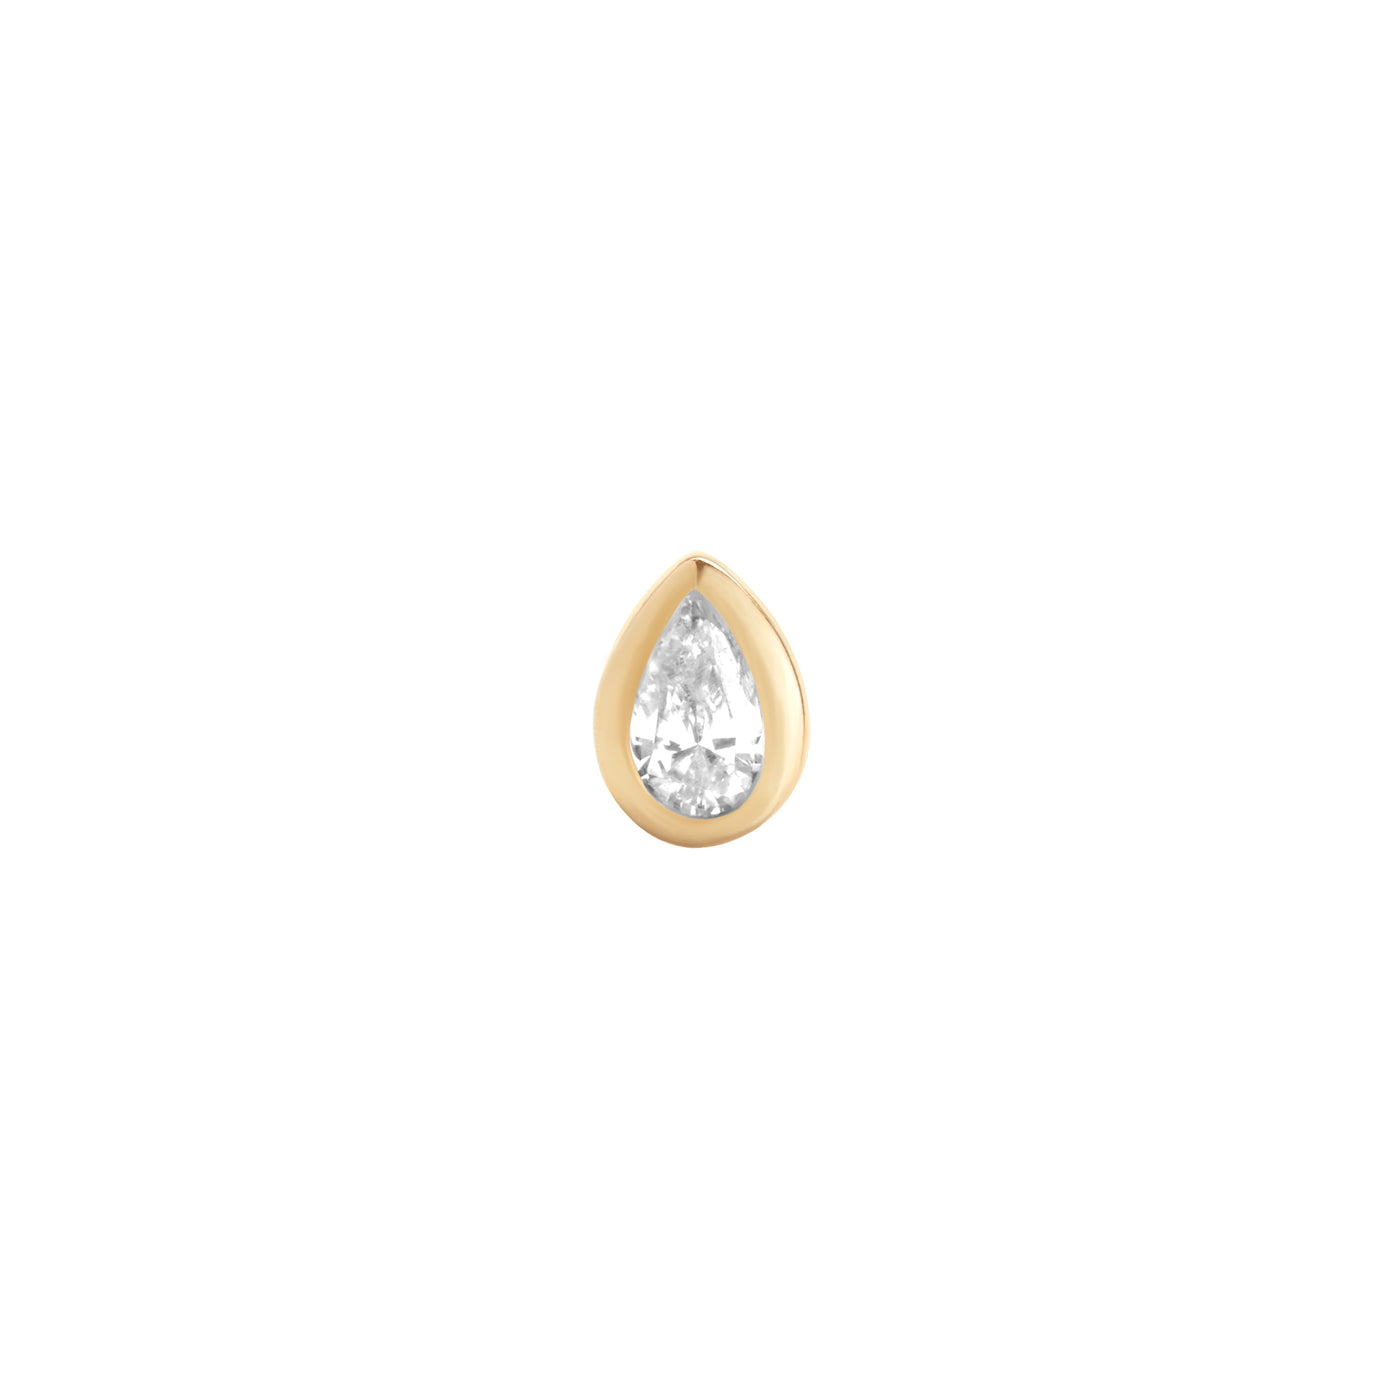 14 Karat Yellow Gold Pear Shaped Stud Earring with Diamond Center Stone on White Background